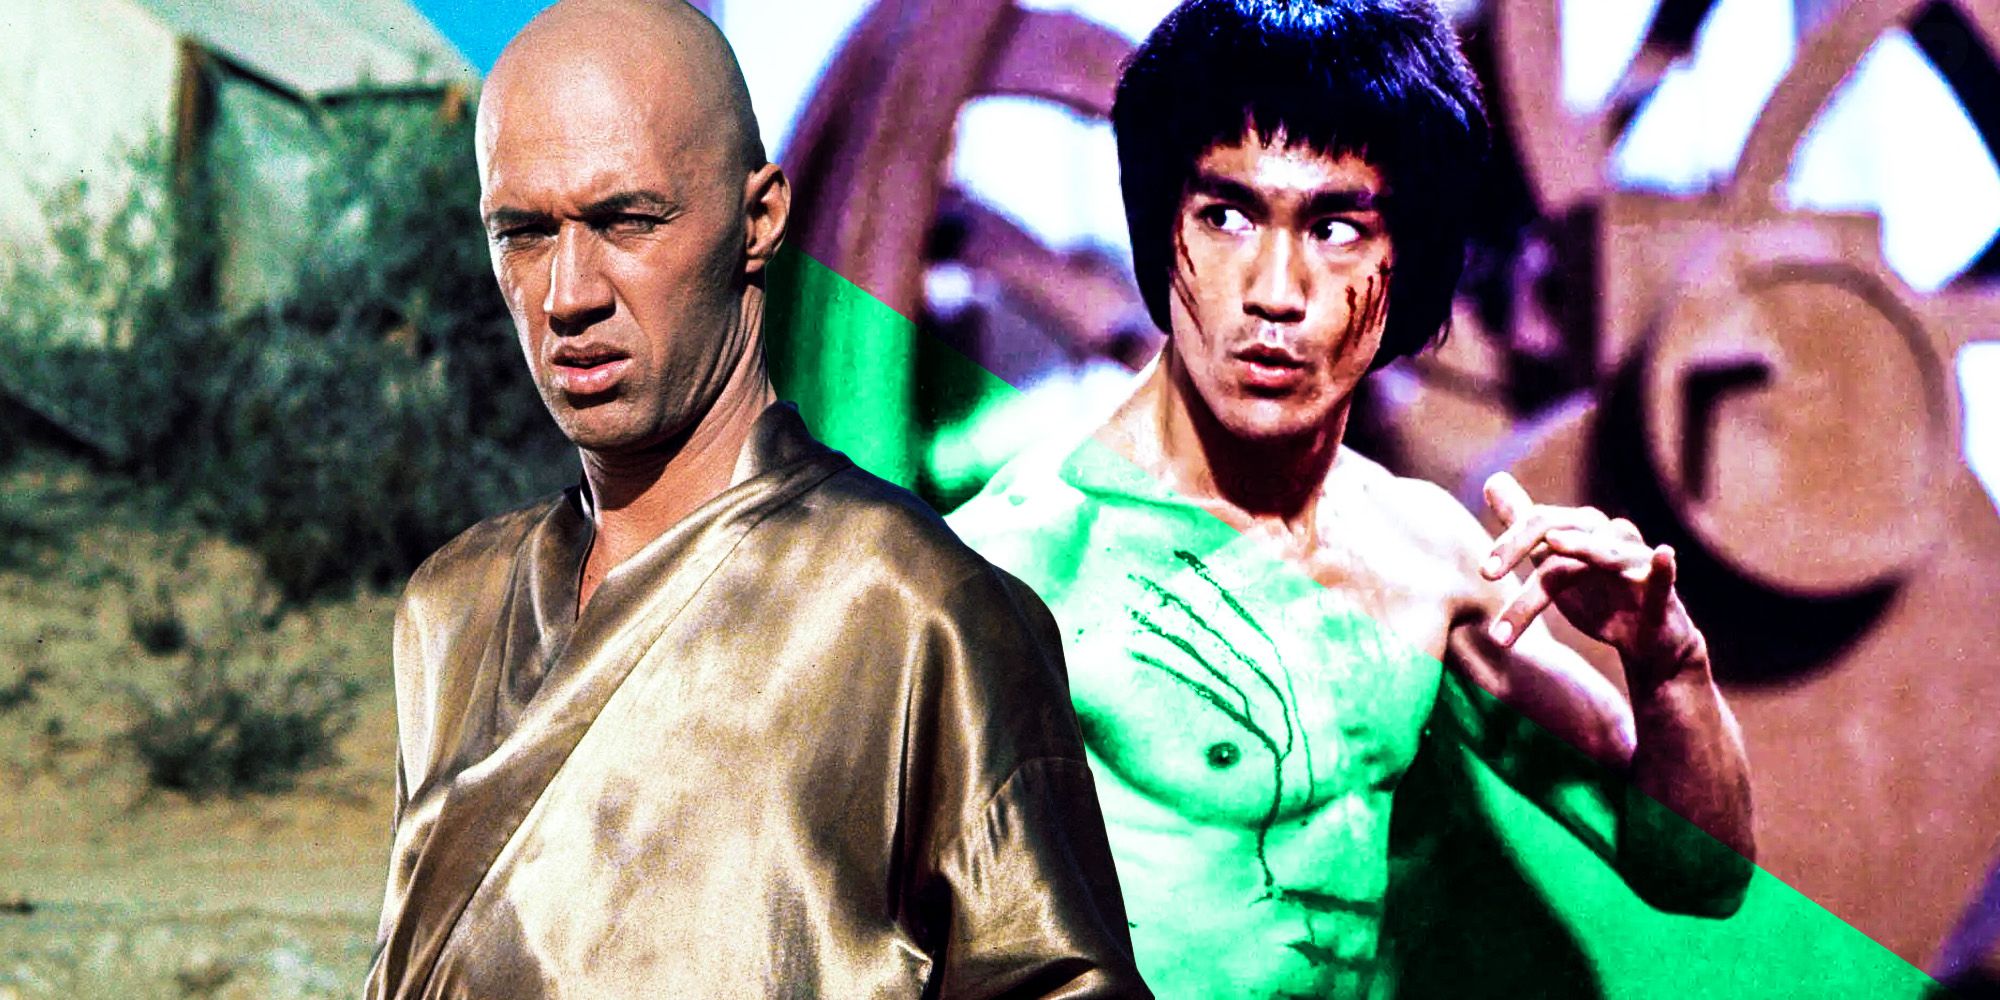 Bruce lee connection to original Kung Fu show